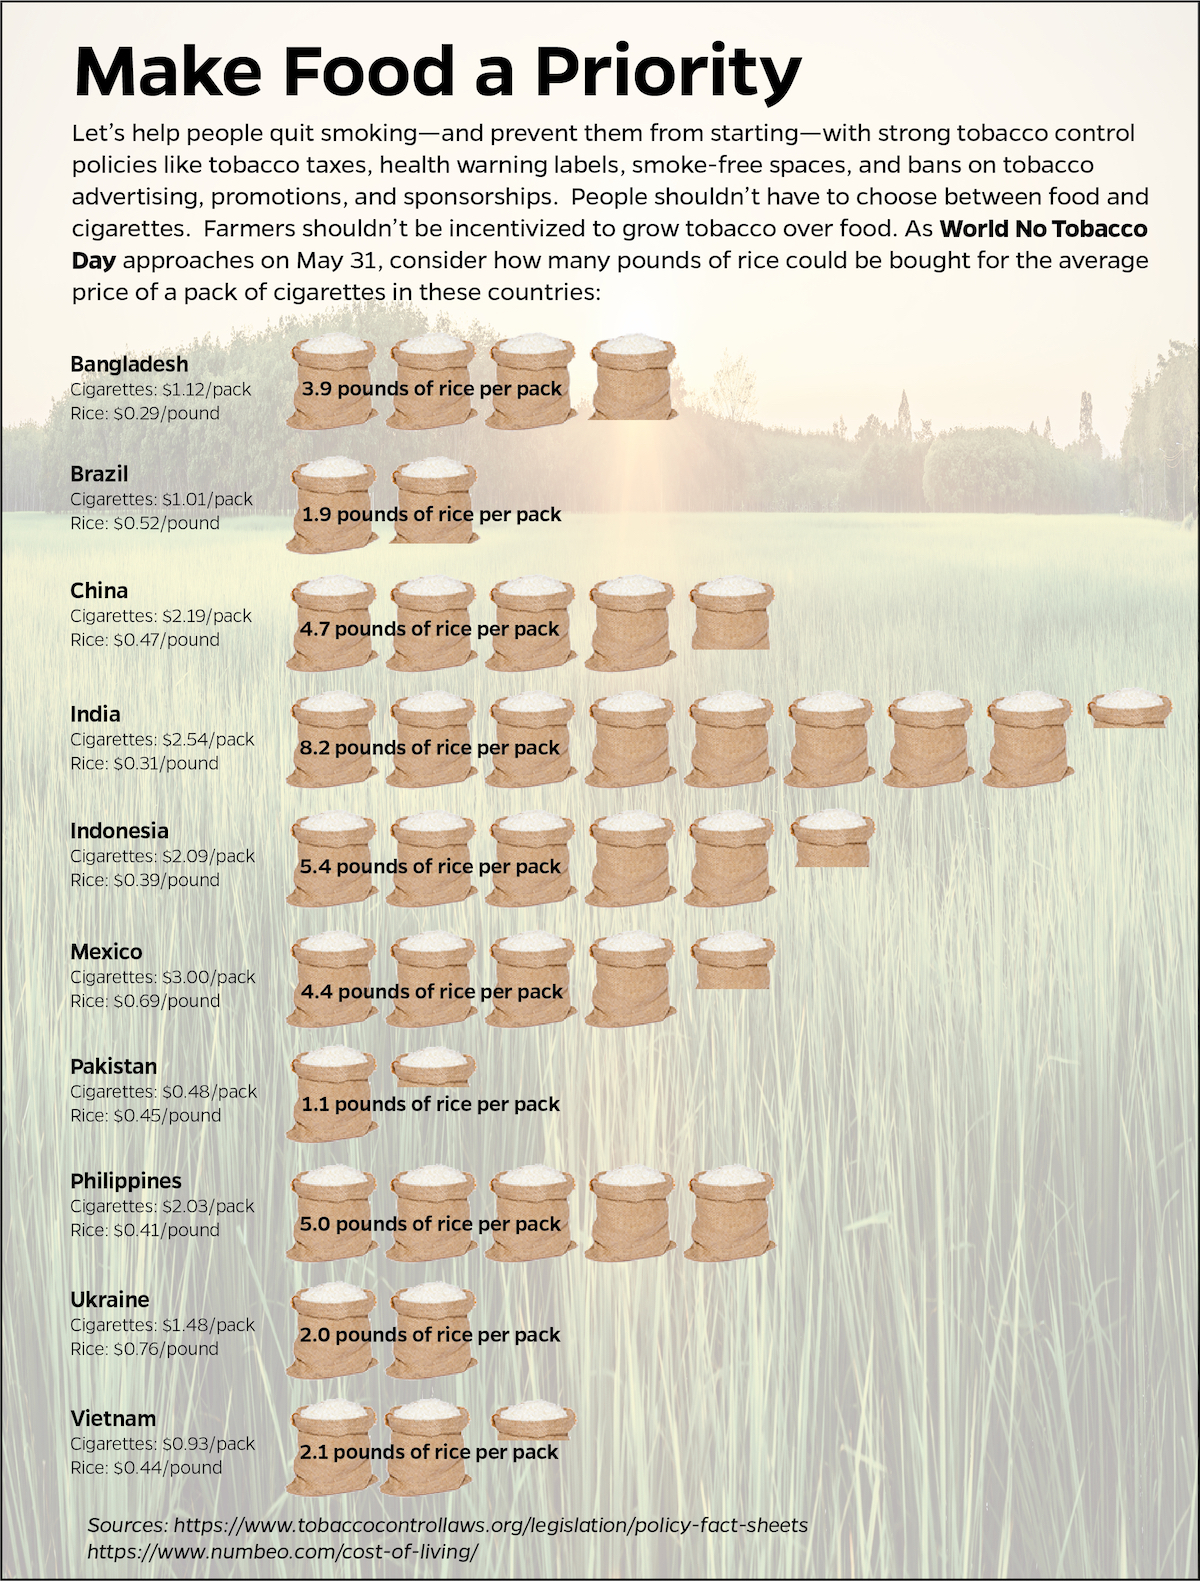 digital illustration comparing consumer price data on rice vs. cigarettes in ten countries, using sacks of rice to represent quantities. Background is a photo of a sunny farm. 